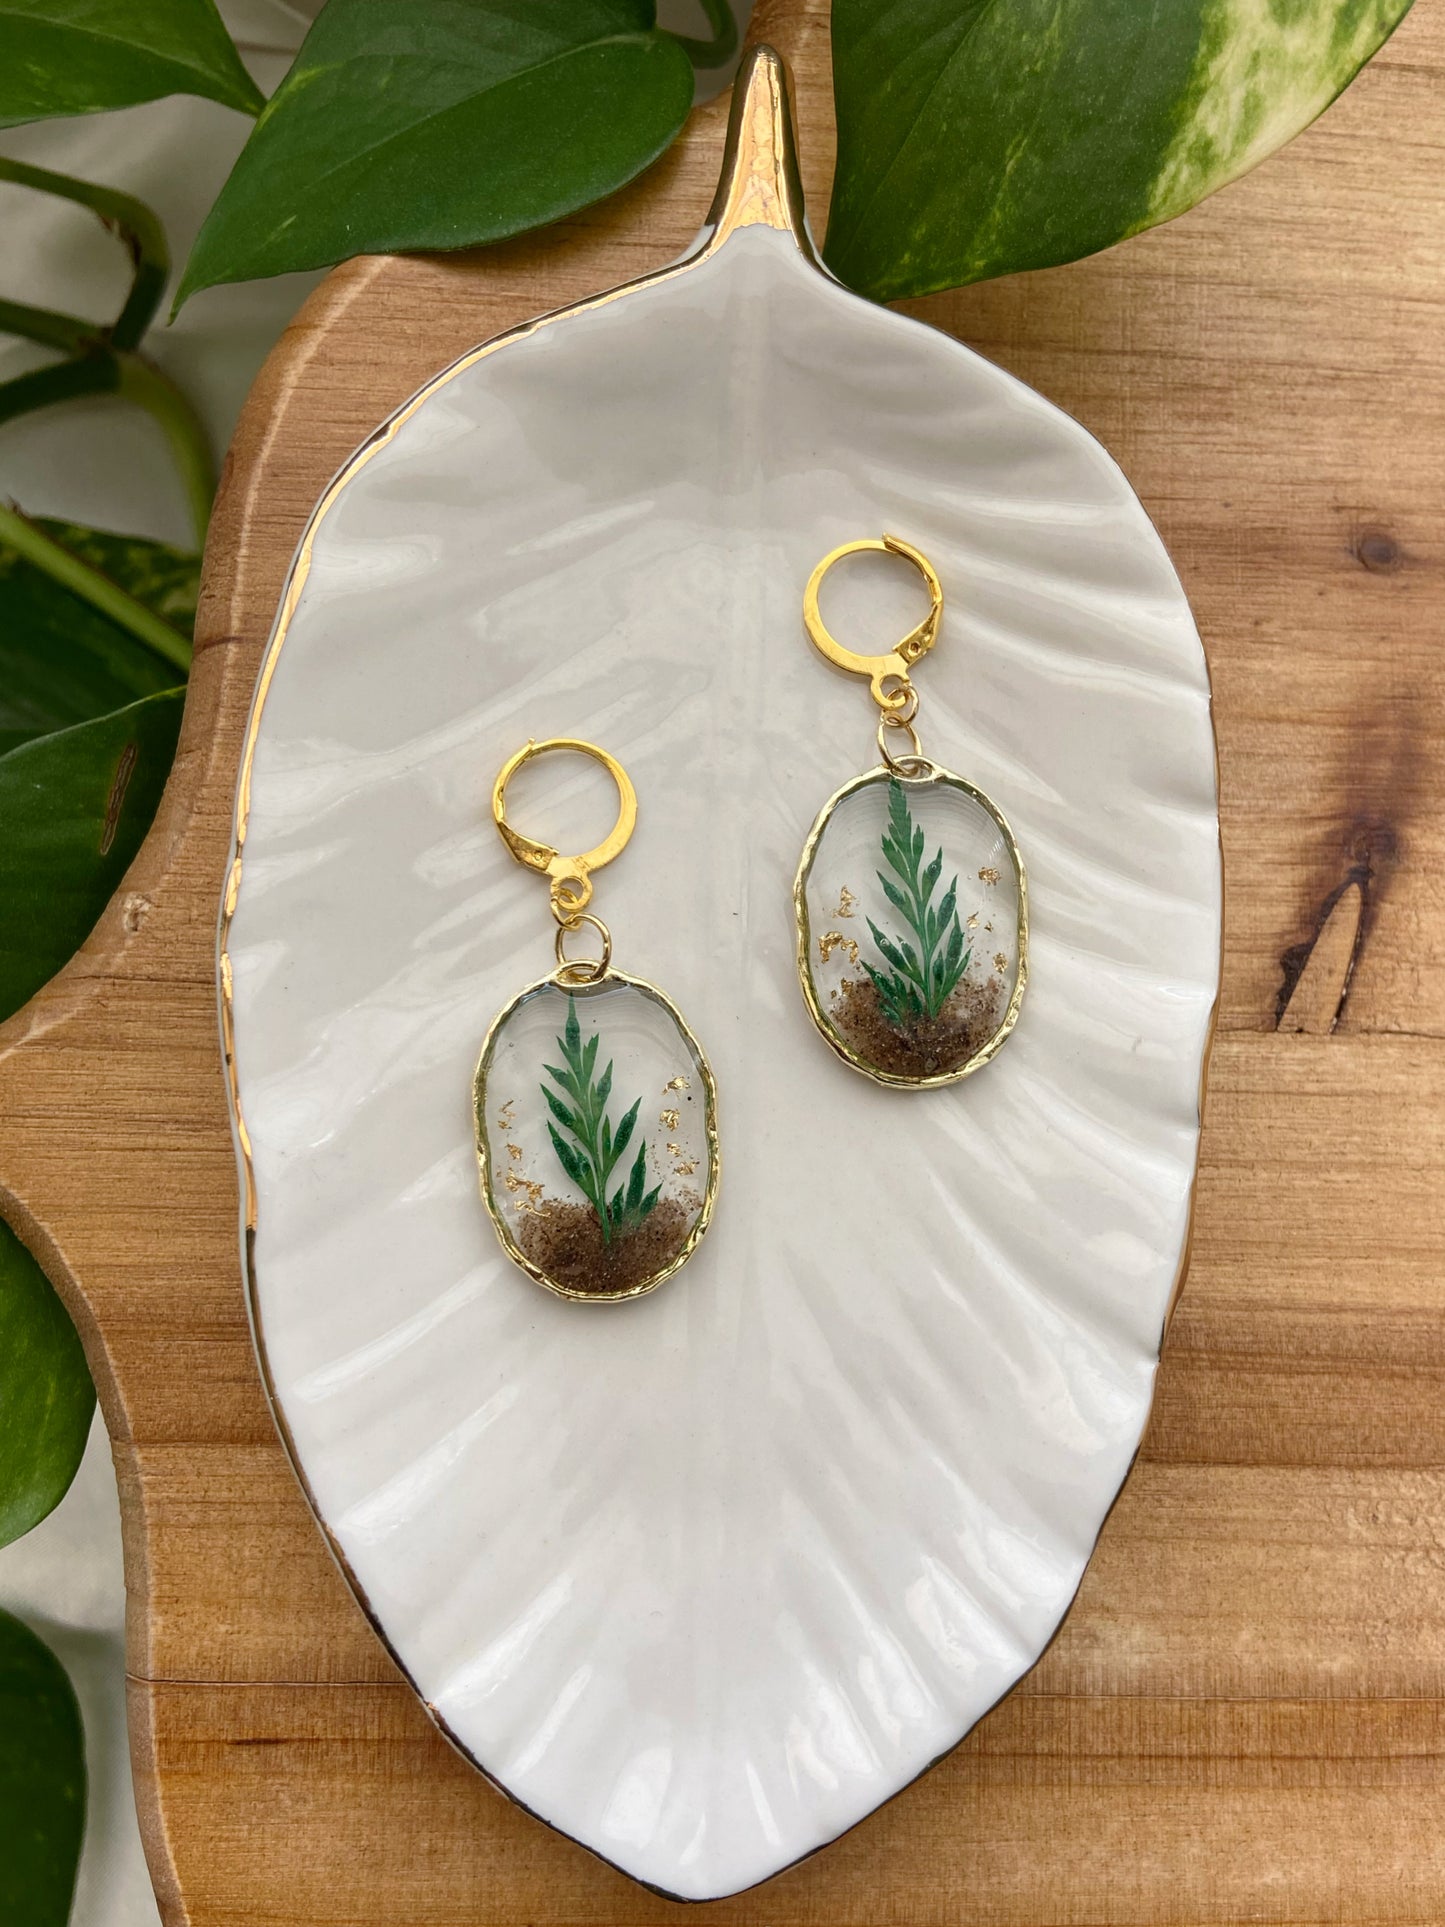 Mini Oval Terrariums- Gold open earrings filled with real soil, plants & gold flakes, clasp hoop earring